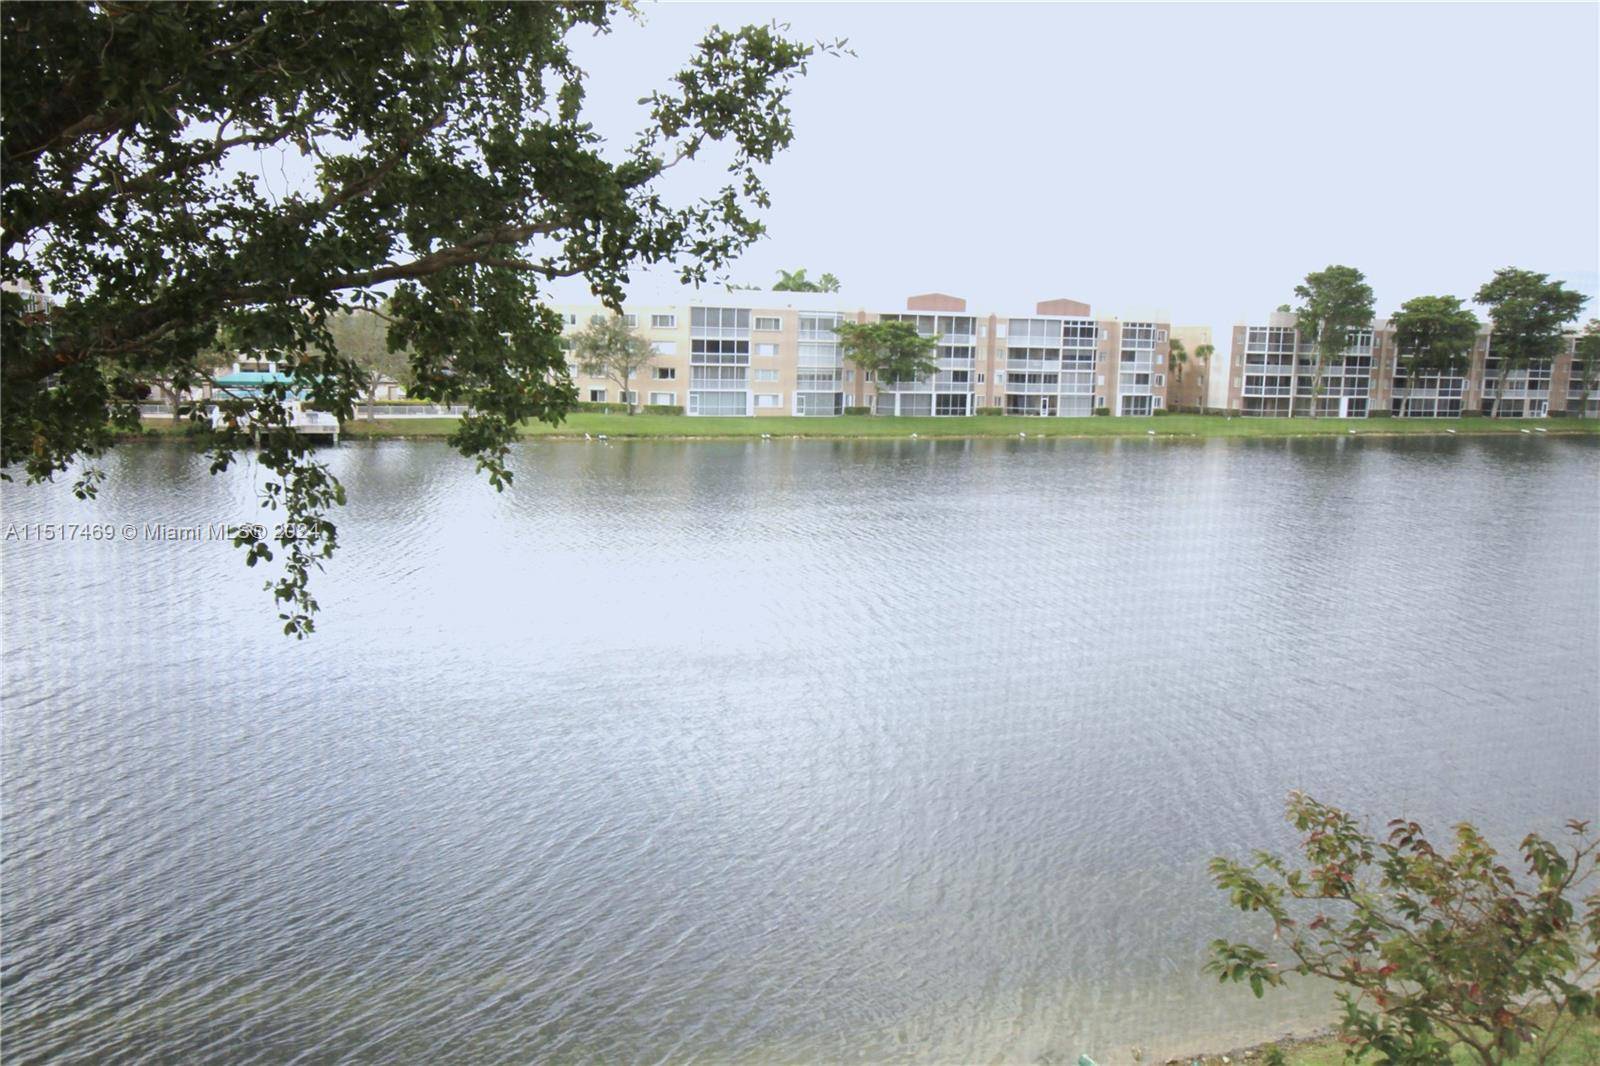 BEAUTIFUL LAKE VIEW CONDO WITH 2 BEDROOM AND 2 BATHROOMS.